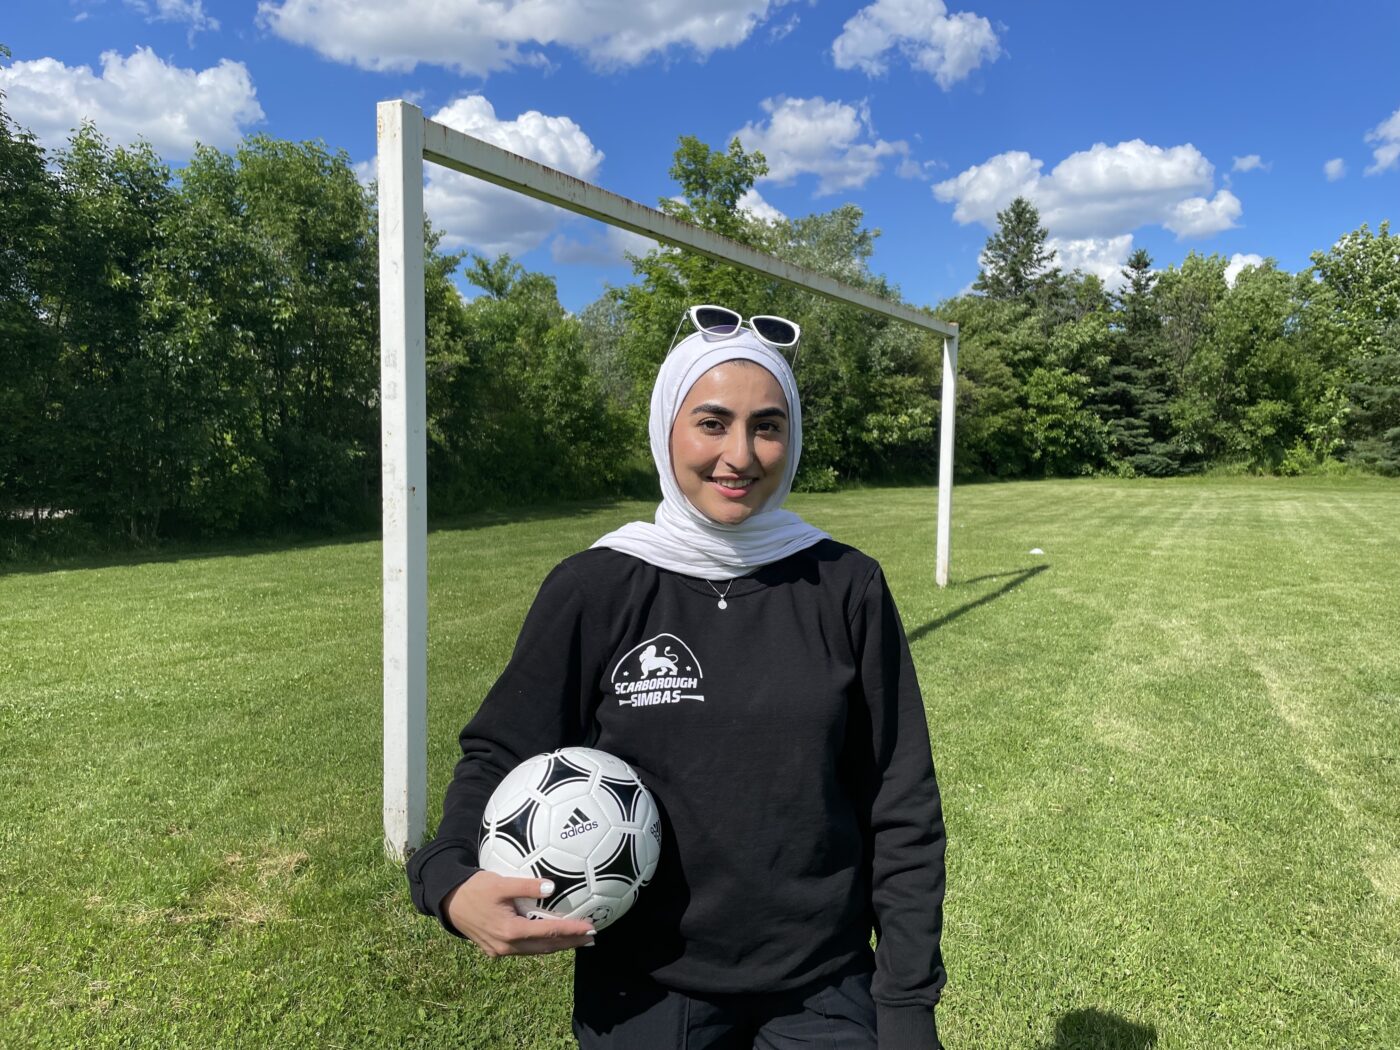 Mohazzama Muhtaj, program director of Scarborough Simbas, stands on the soccer field at Terraview Park in Wexford.